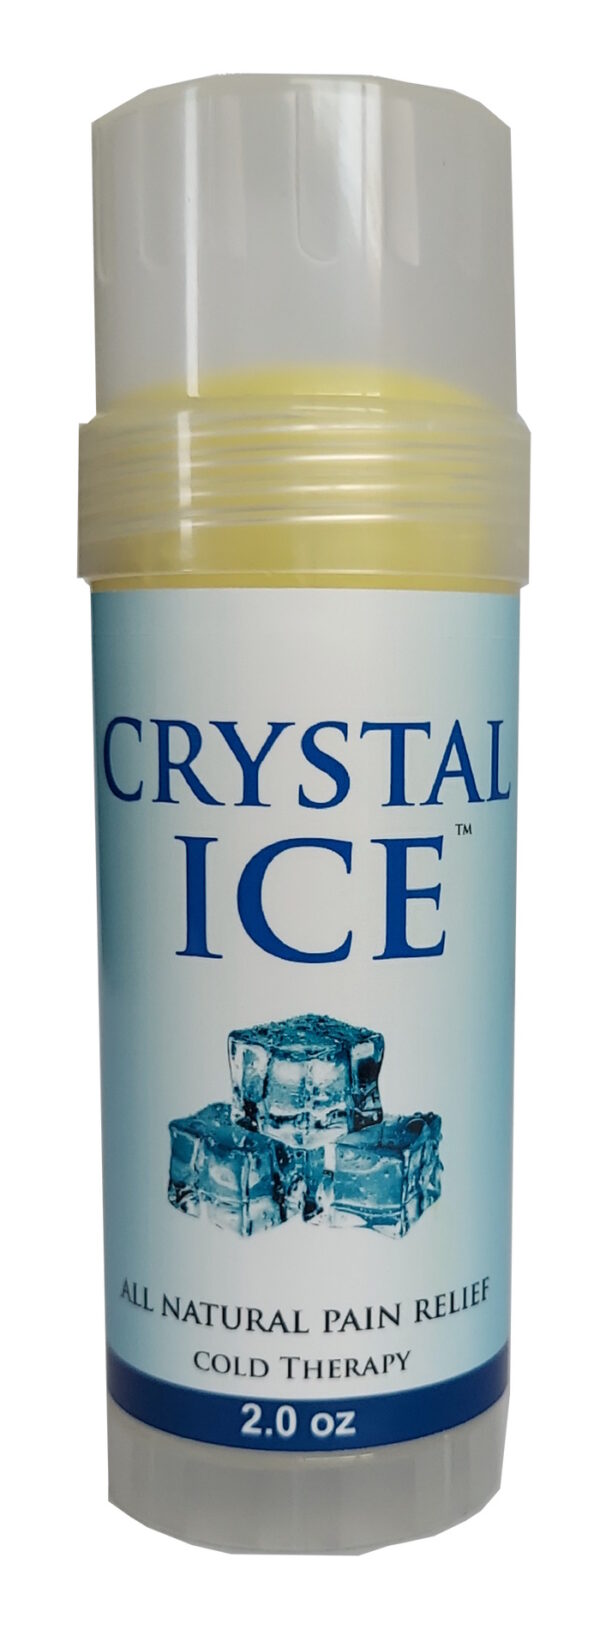 Crystal Ice Pain Relief Muscle and Joint Balm Barefut